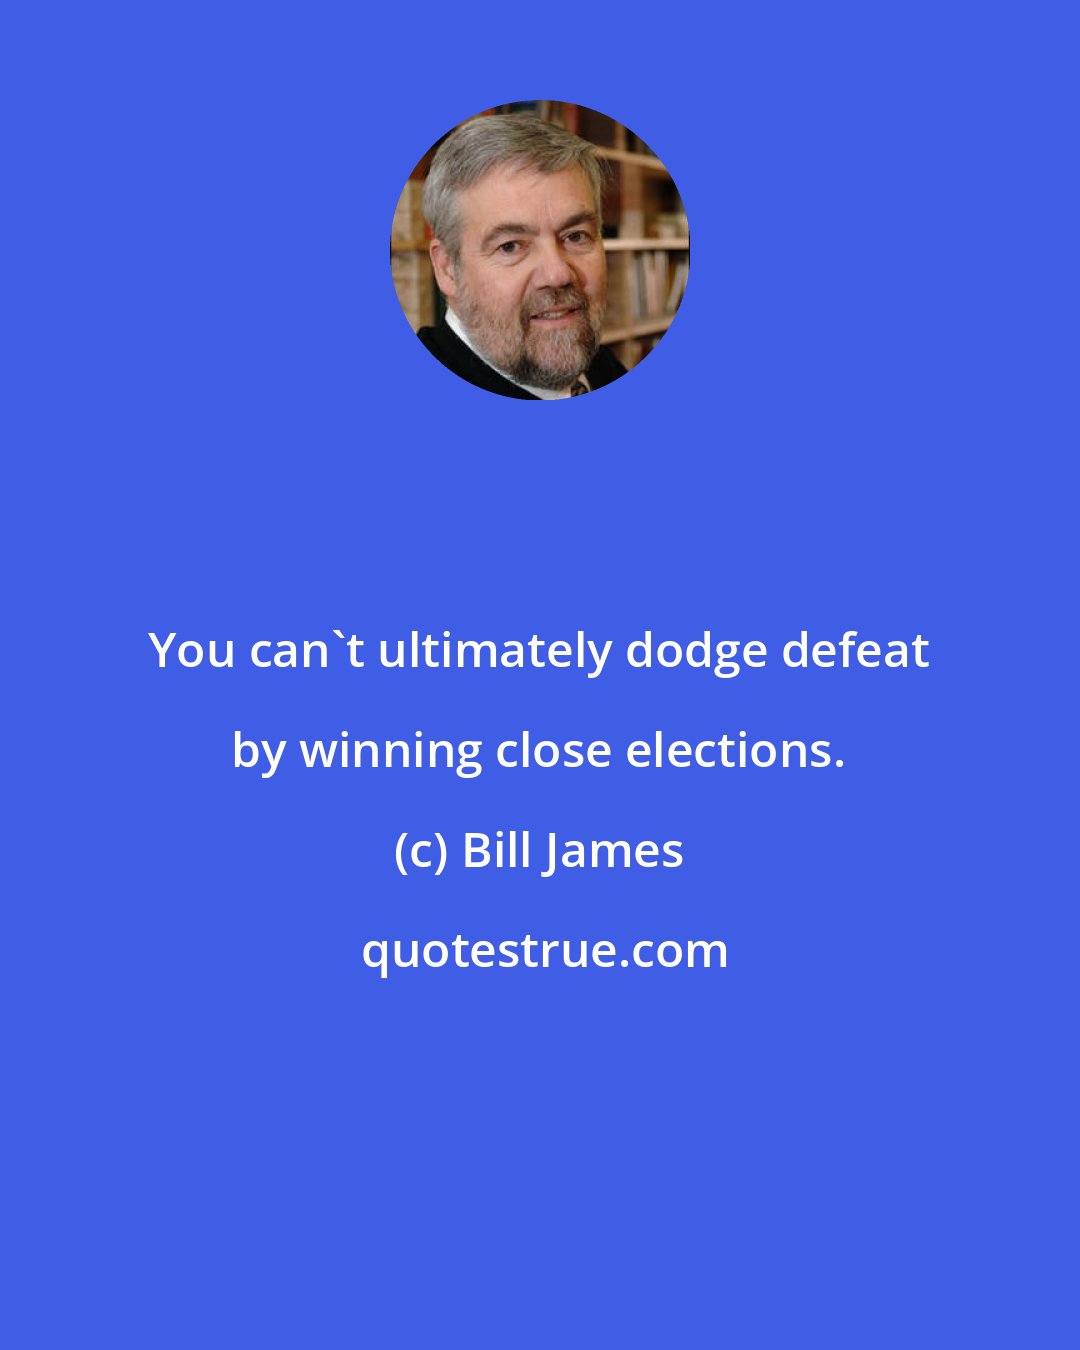 Bill James: You can't ultimately dodge defeat by winning close elections.